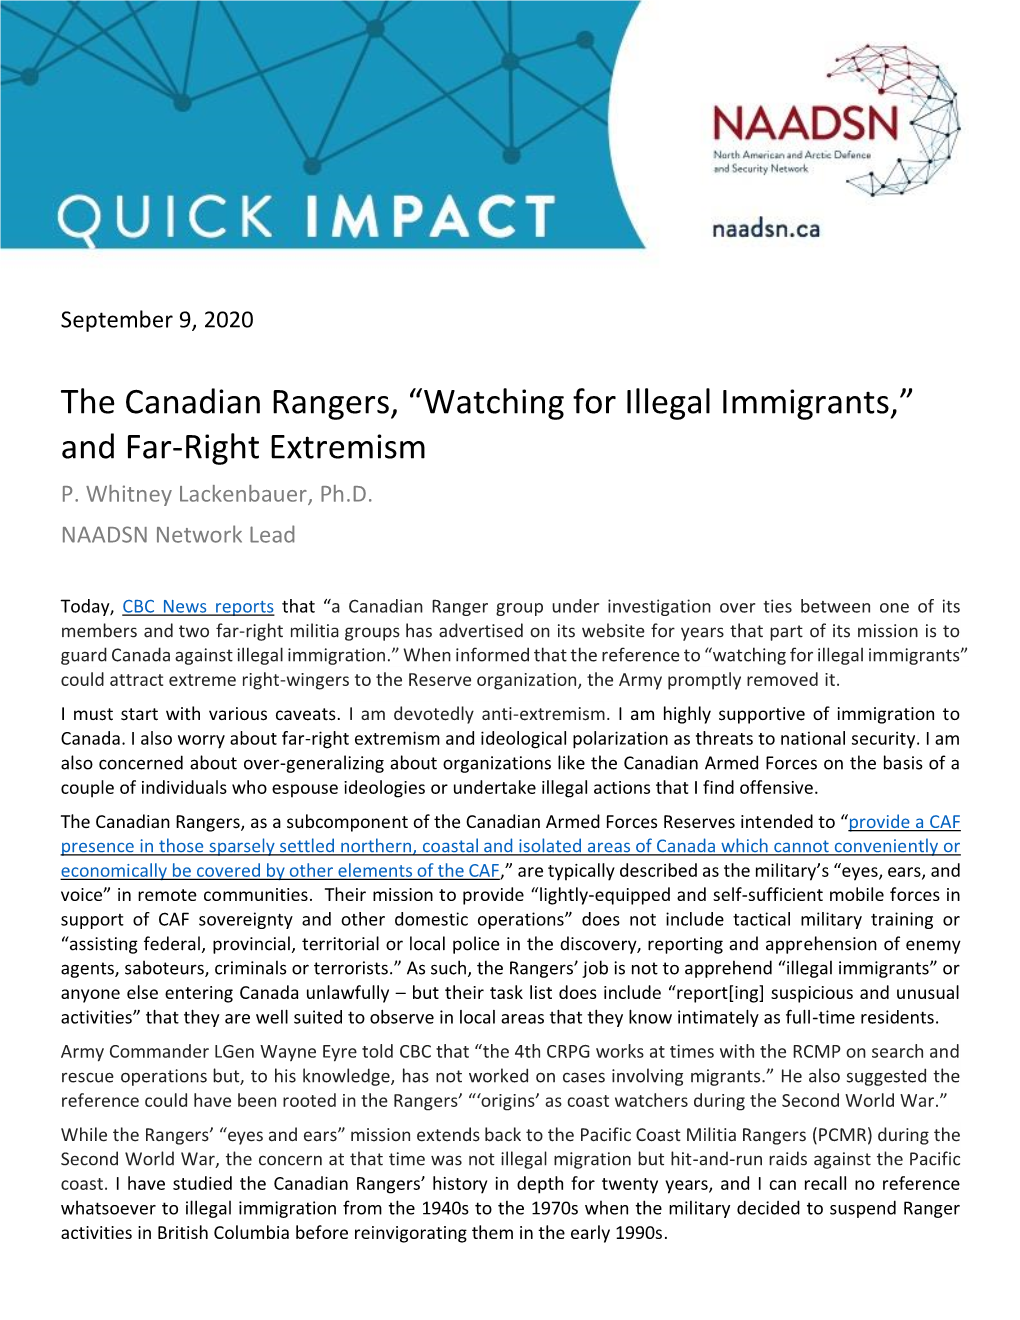 The Canadian Rangers, “Watching for Illegal Immigrants,” and Far-Right Extremism P